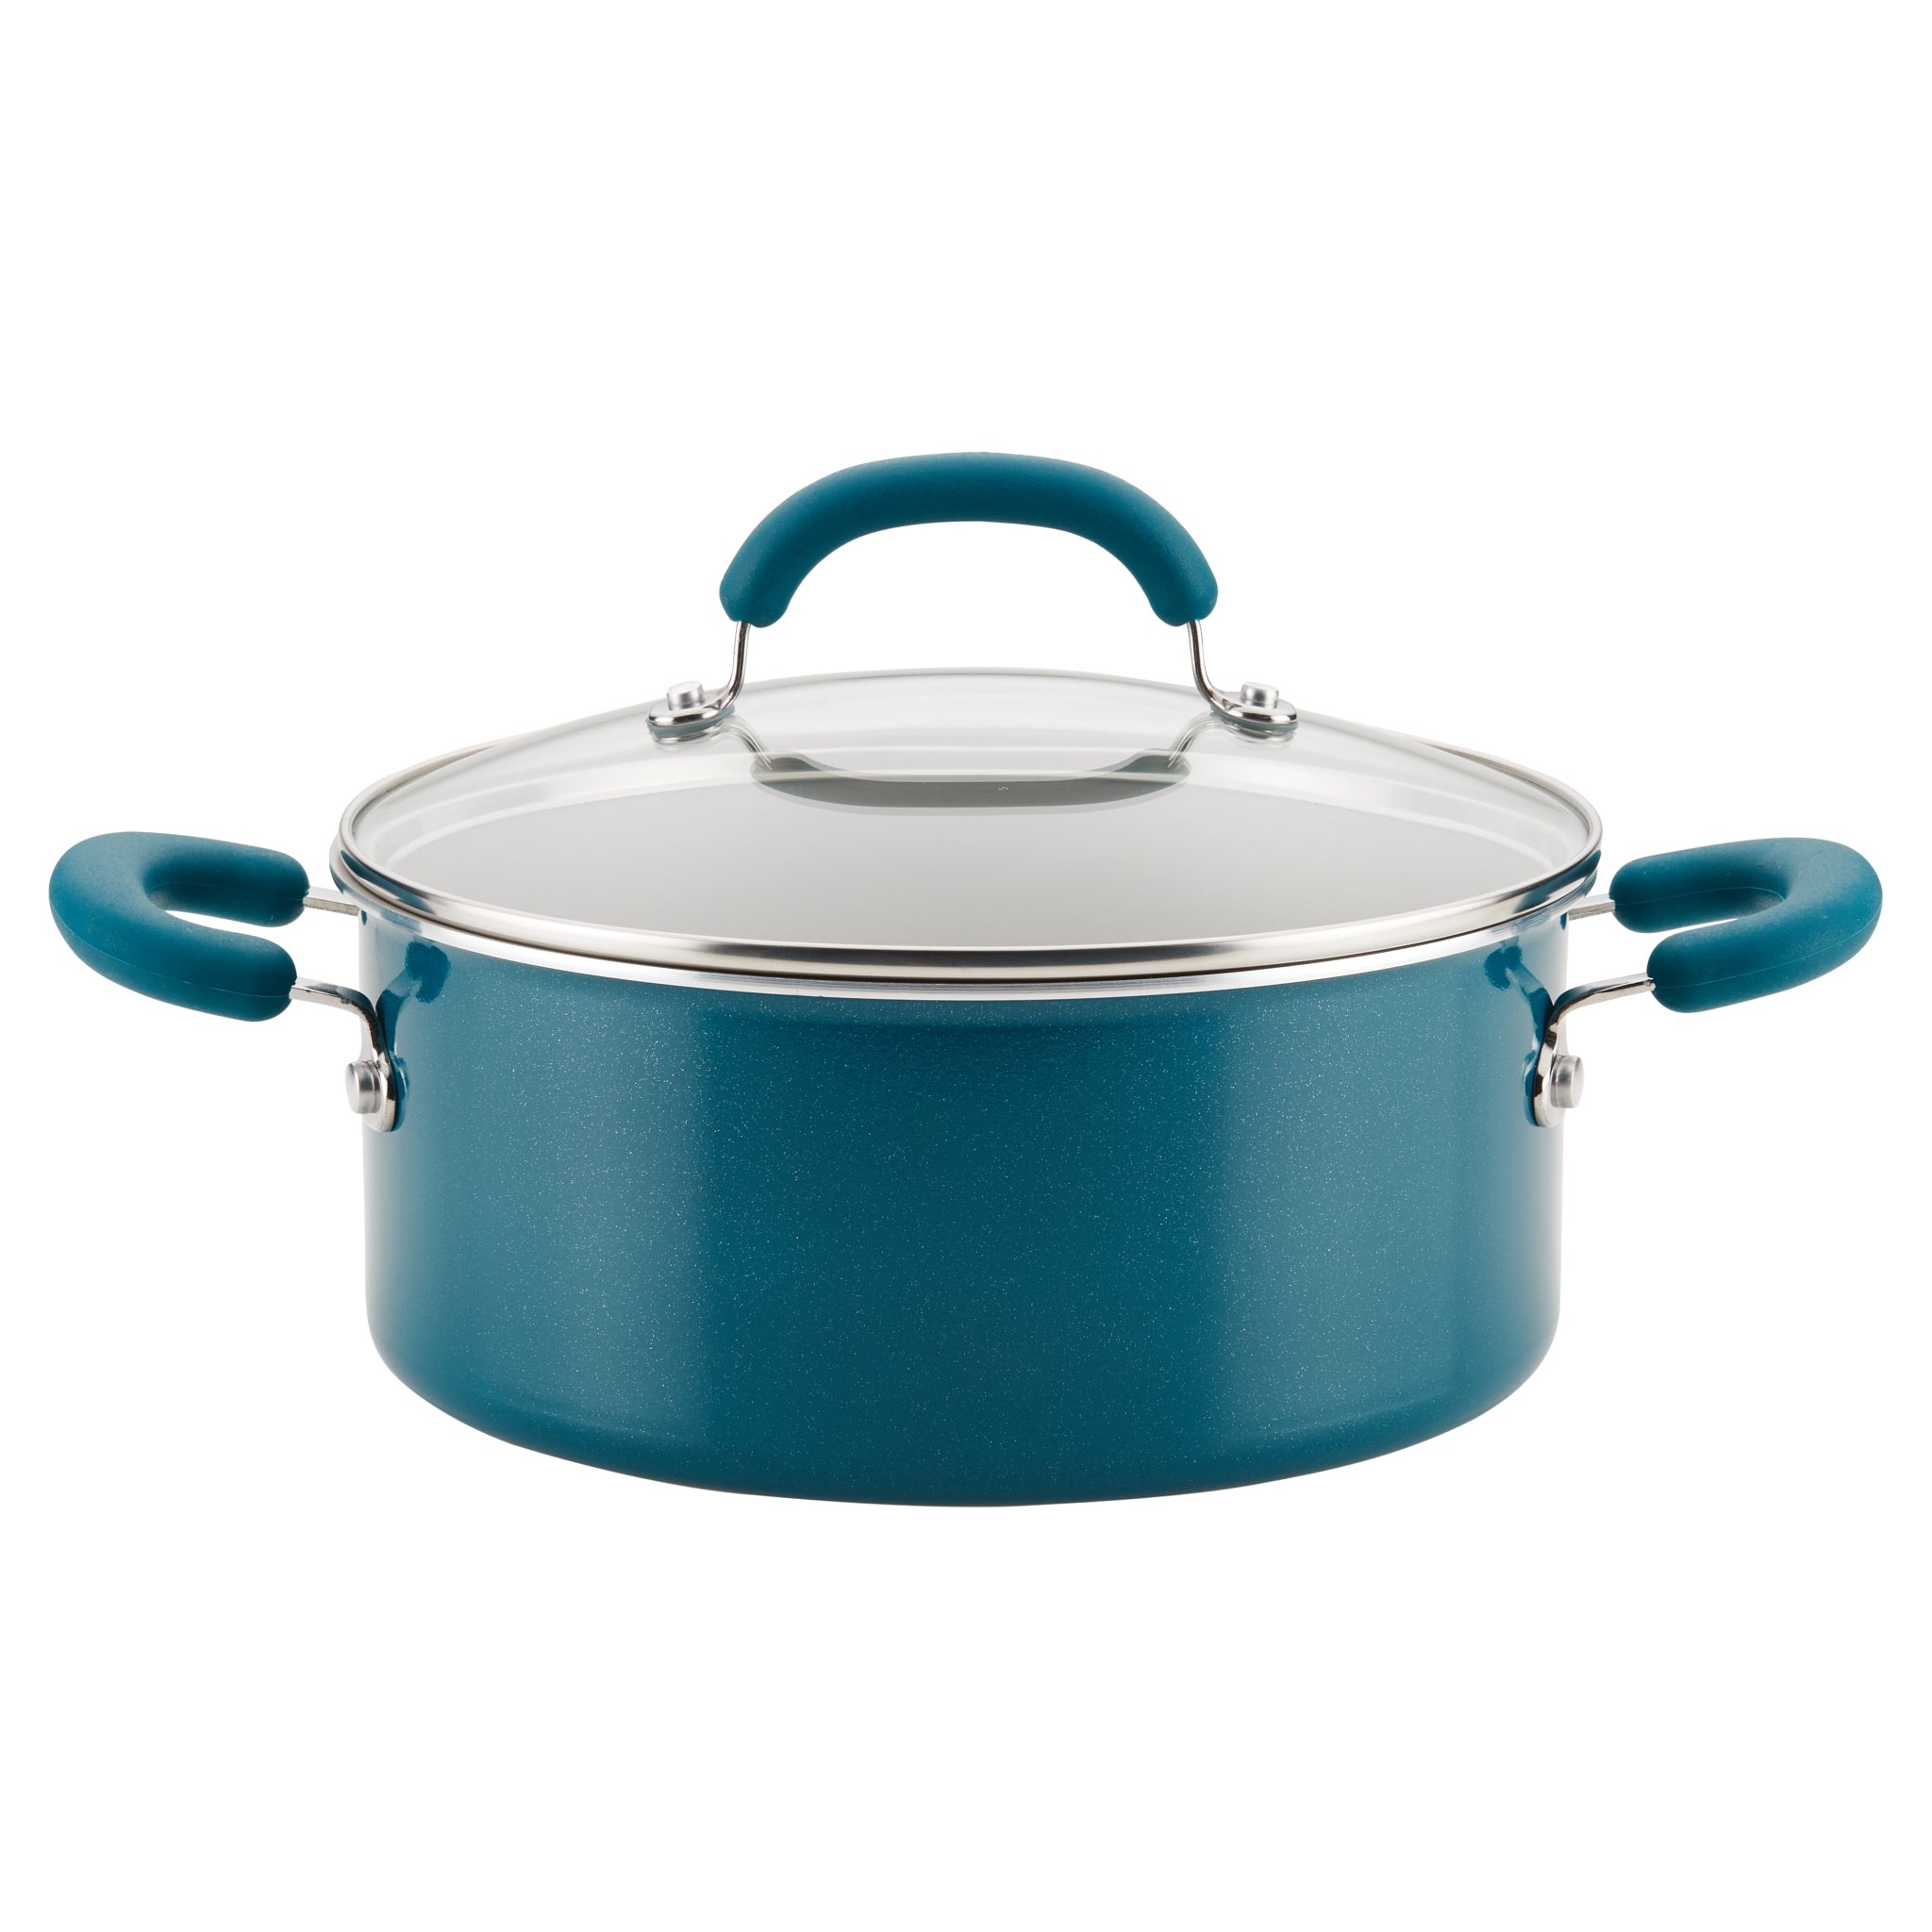 5-Quart Nonstick Dutch Oven with Lid | Teal